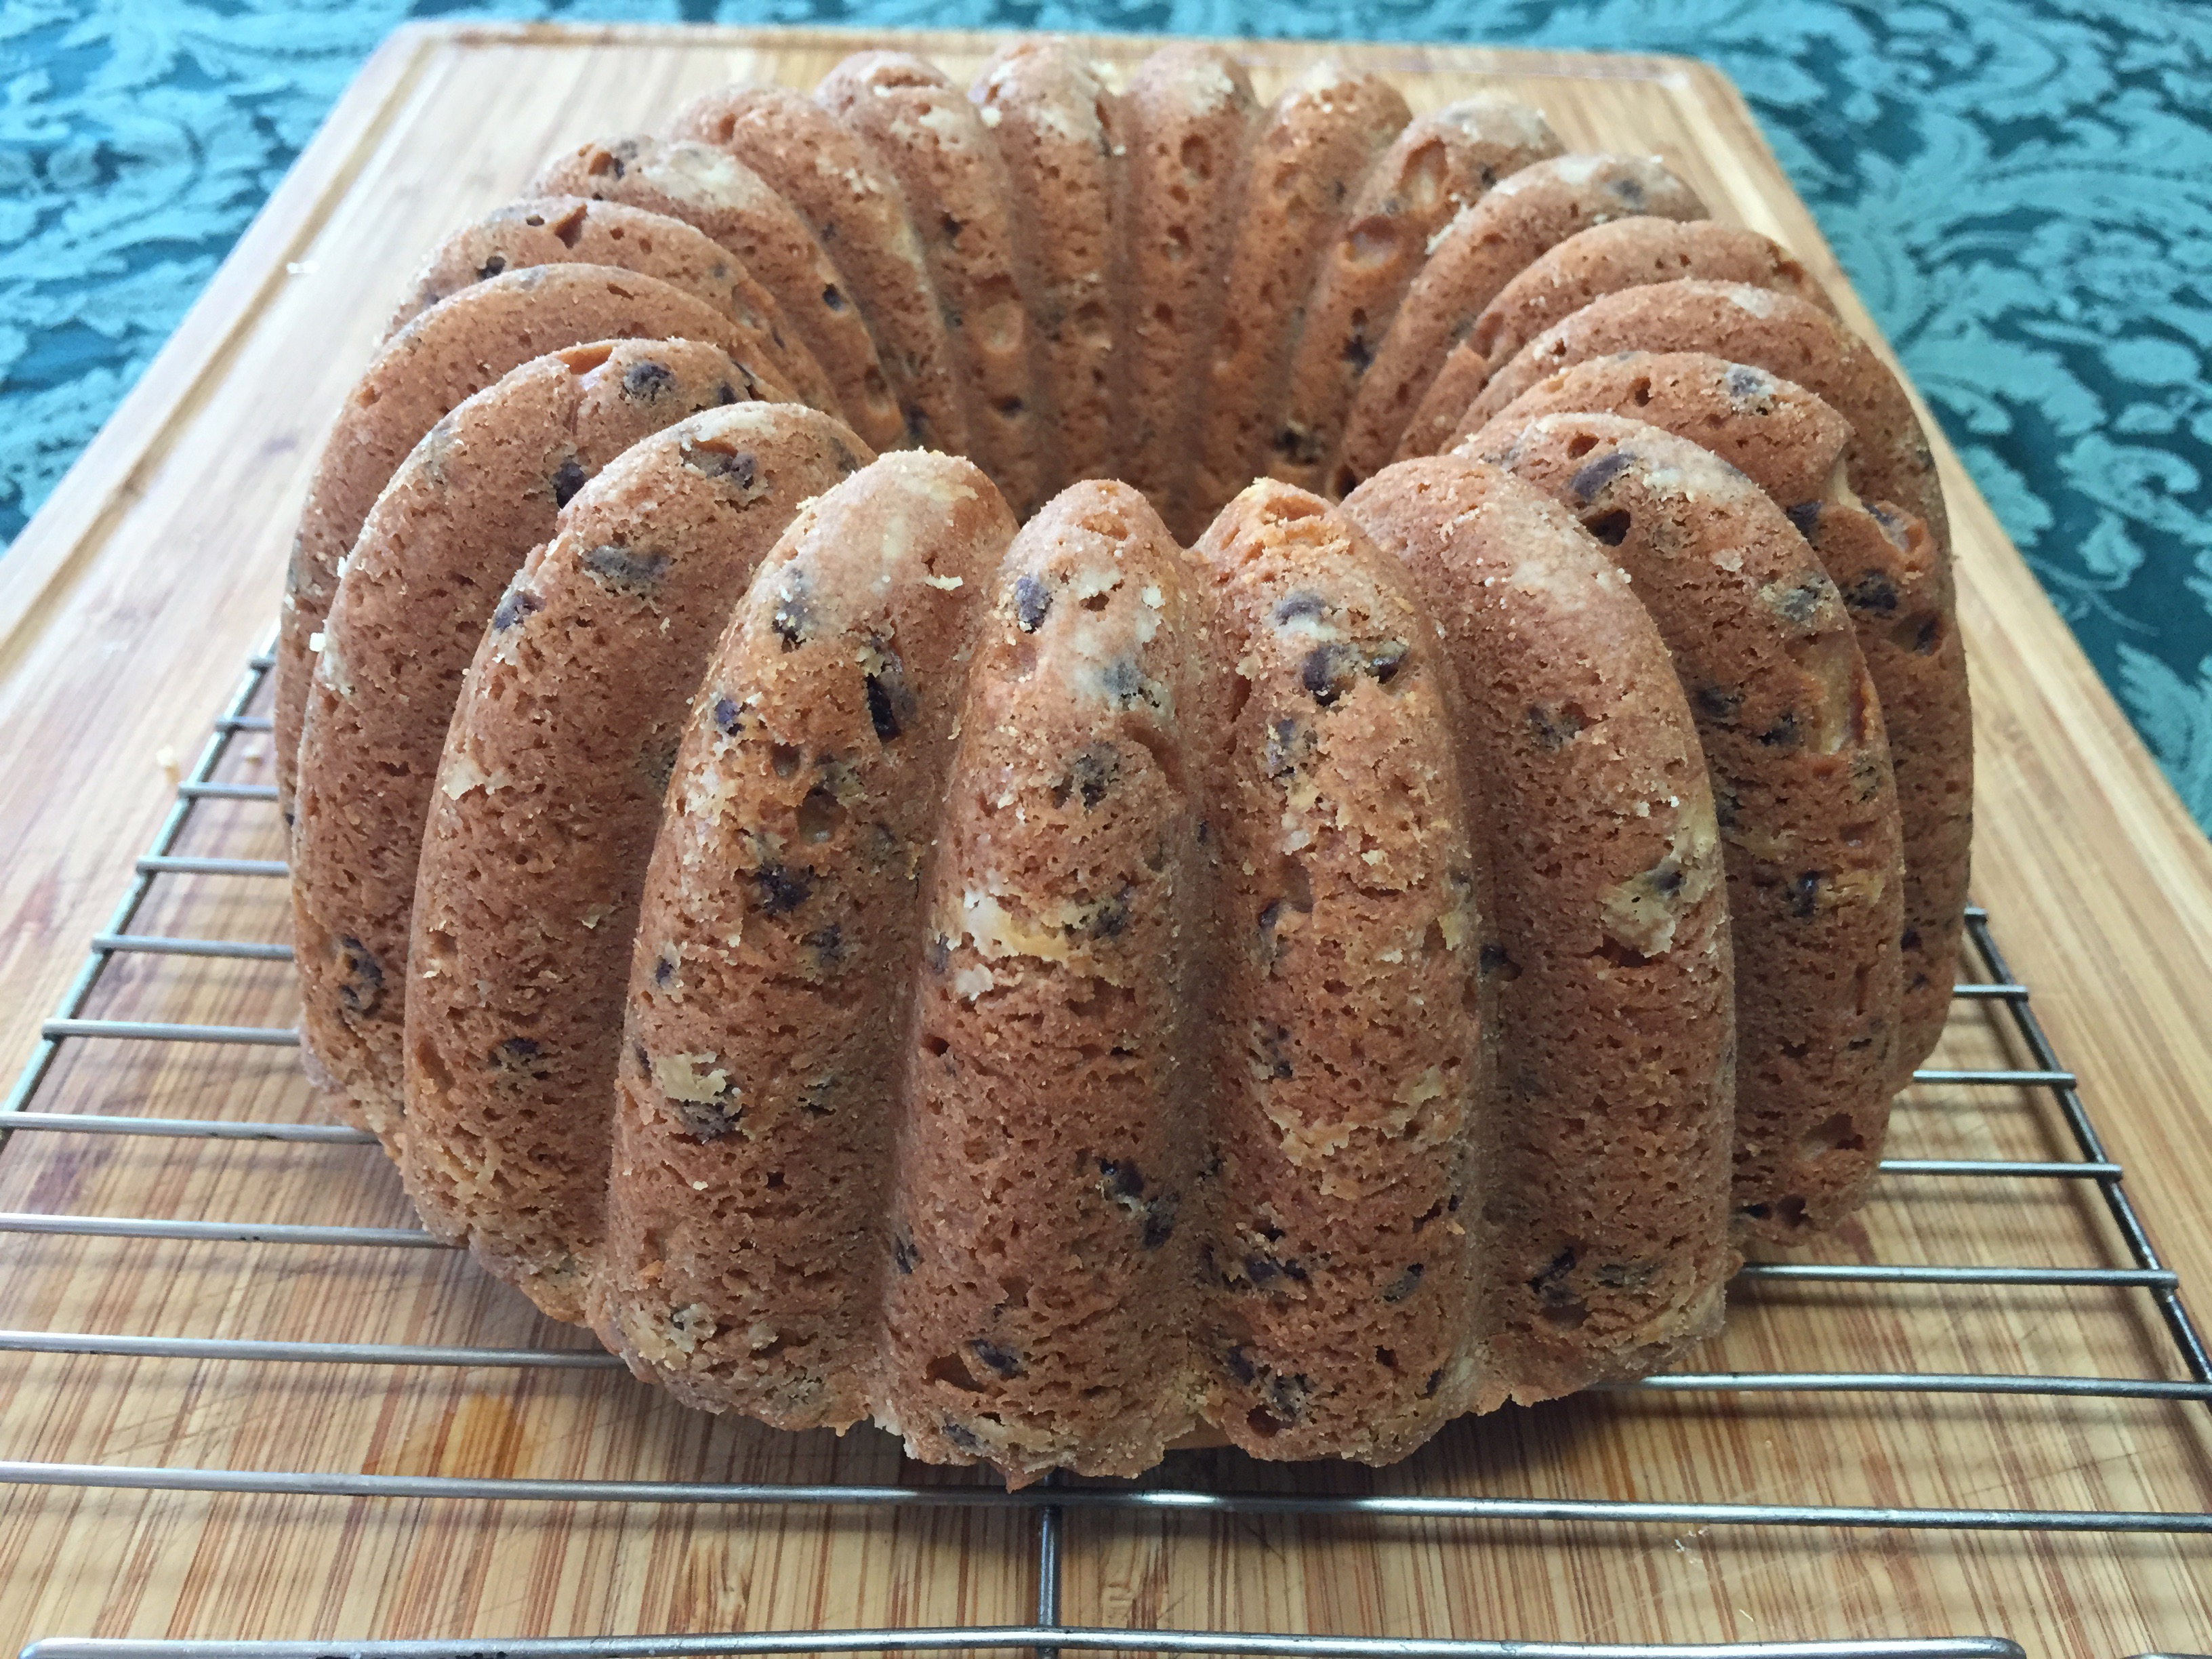 Marzipan-in-the-middle bundt cake recipe